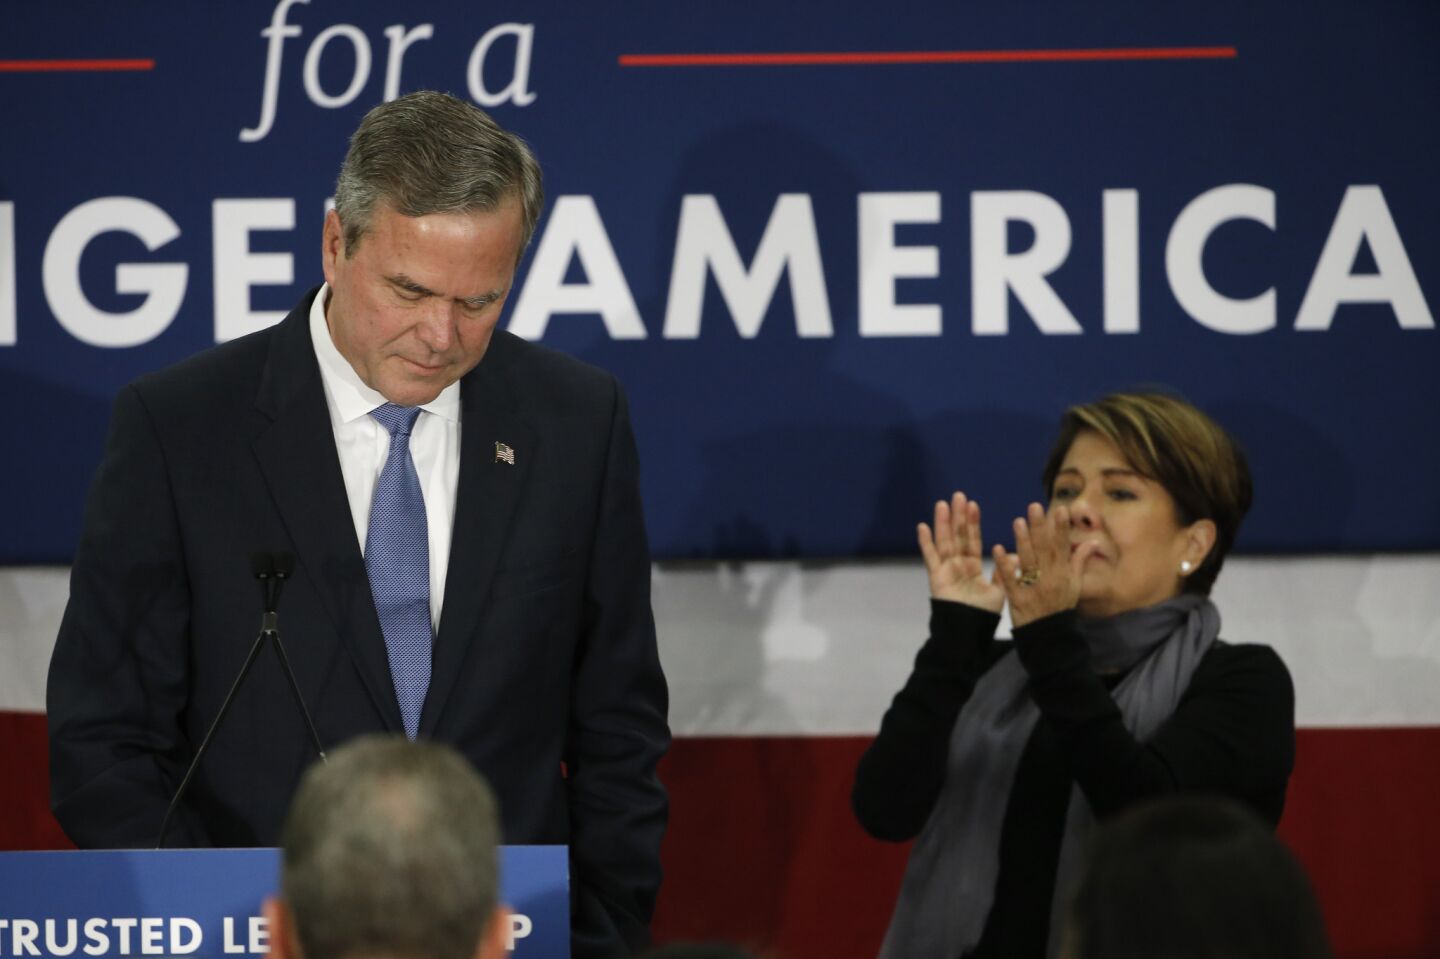 Former Florida Gov. Jeb Bush, accompanied by his wife, Columba, announces his departure from the Republican presidential race.